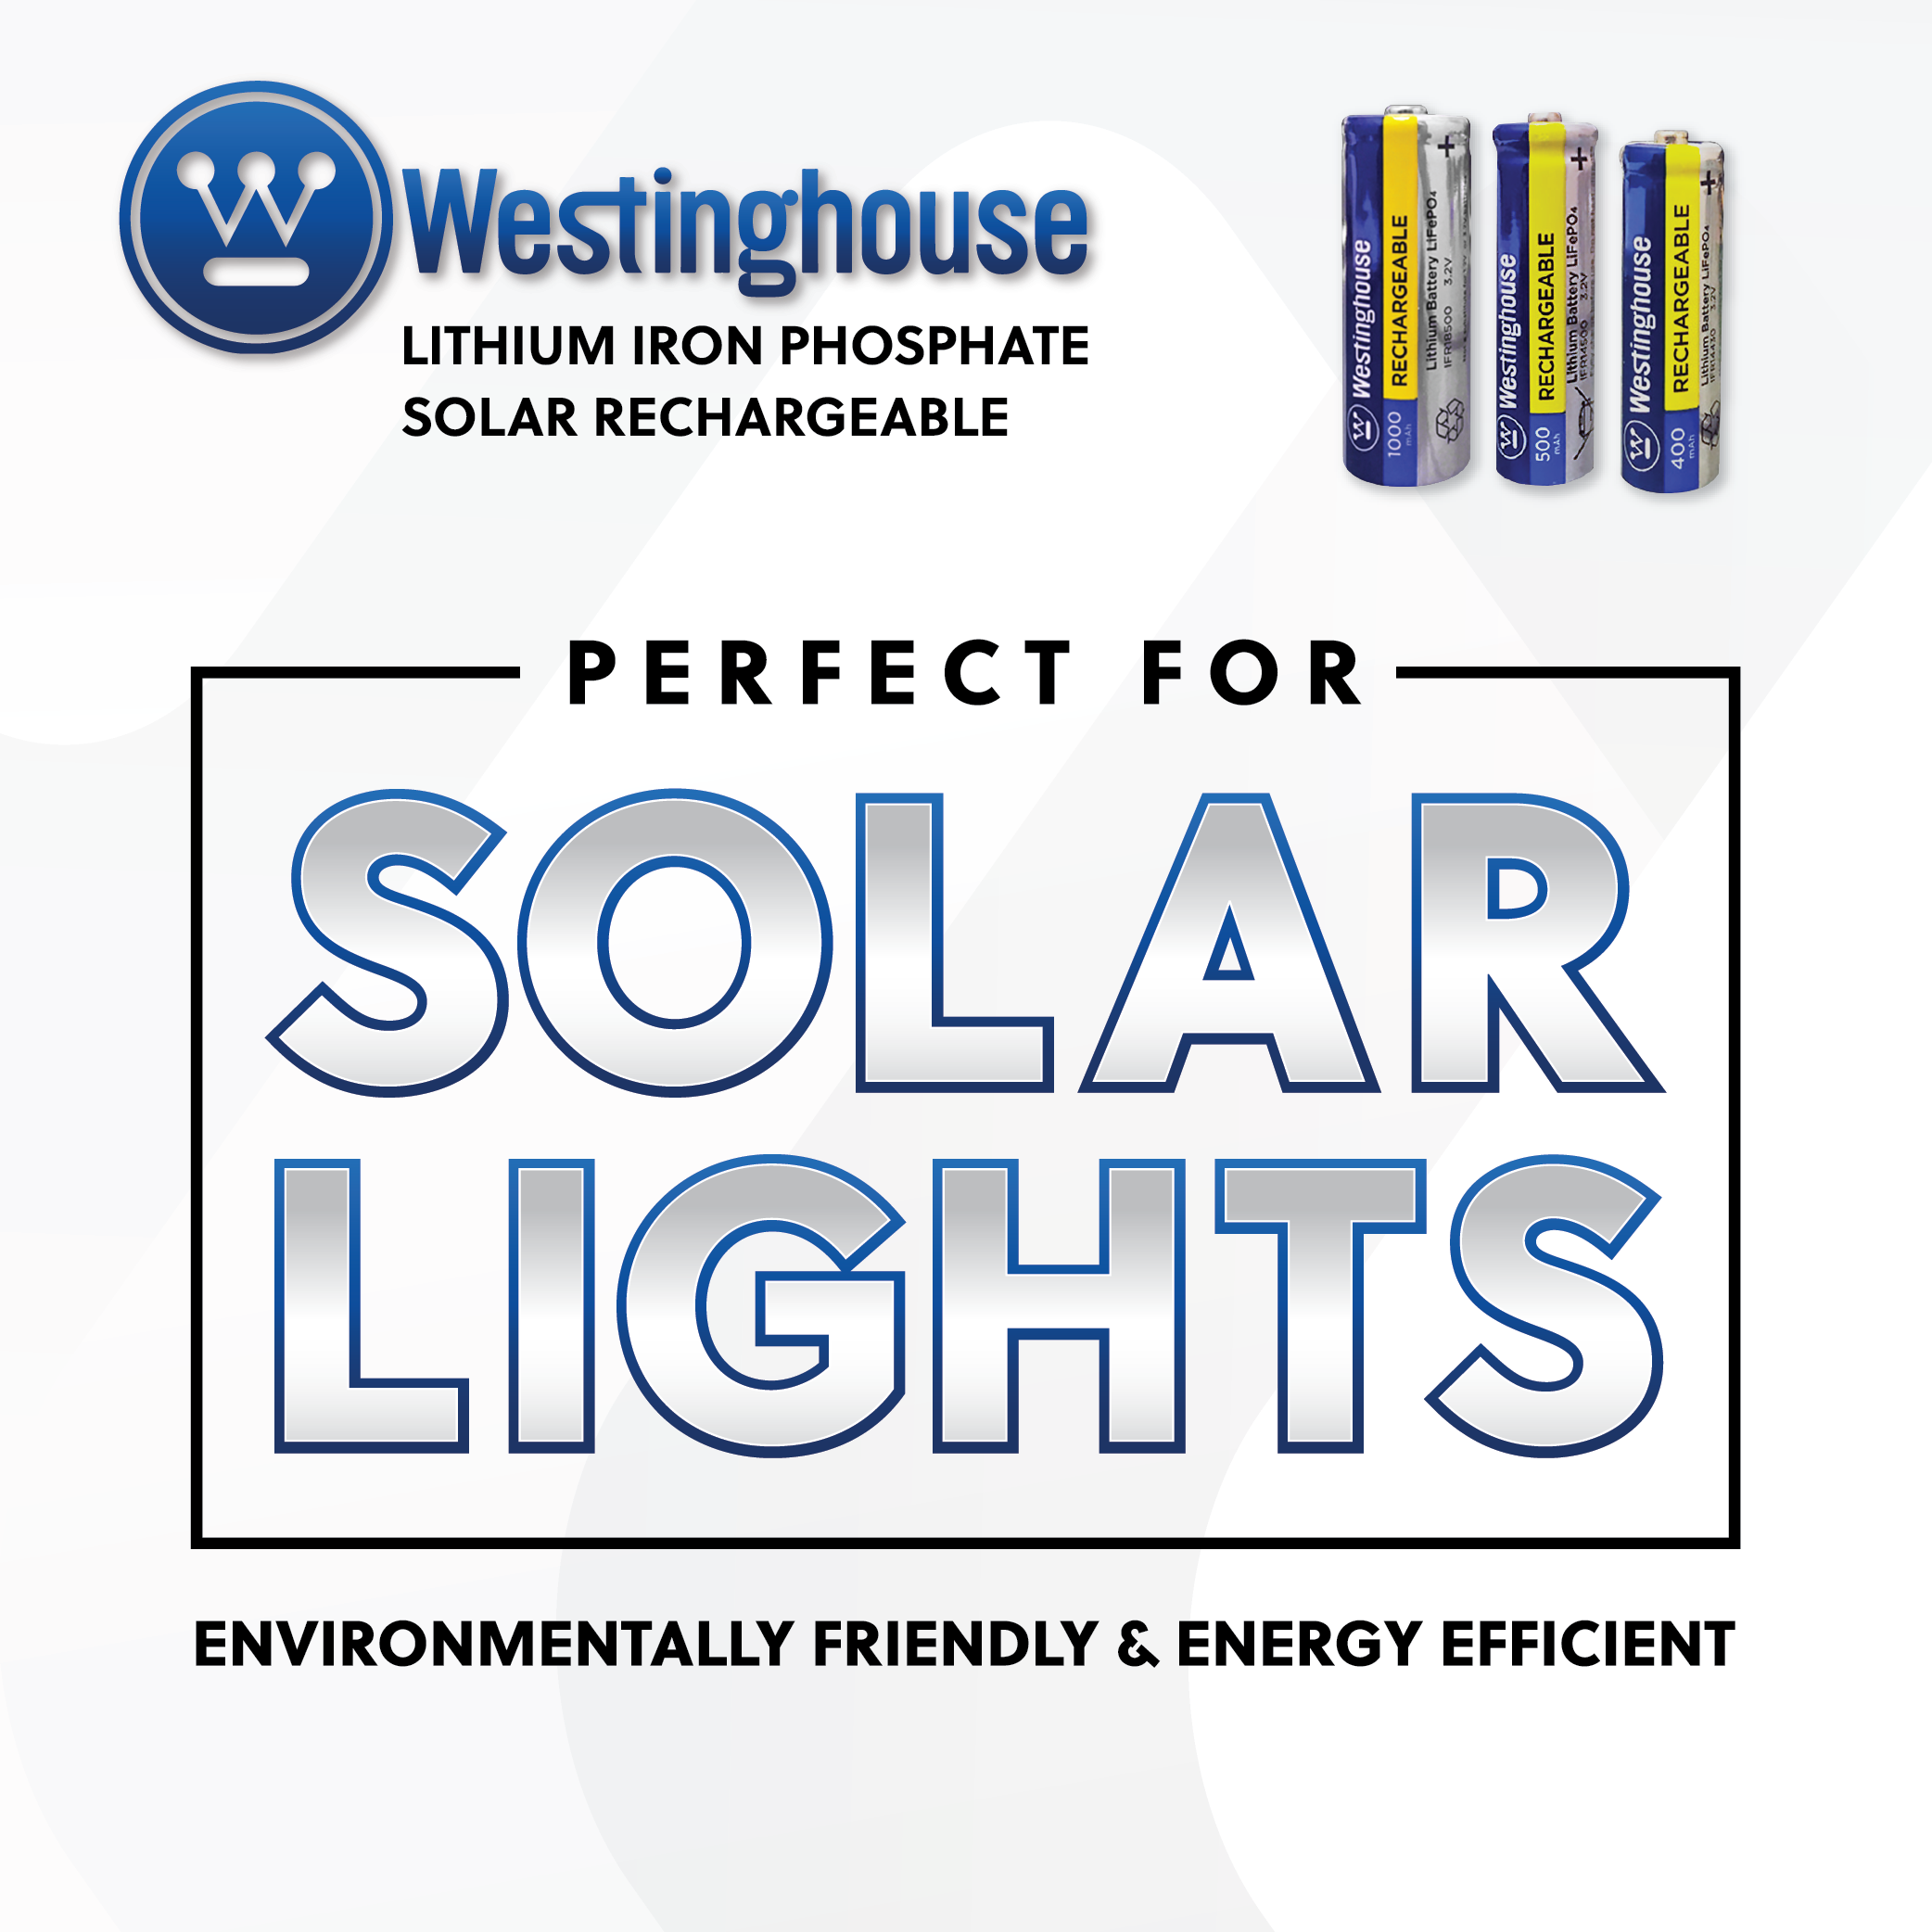 Westinghouse Life-PO4 14430 3.2v 400mah Solar Rechargeable Cardboard Box of 8